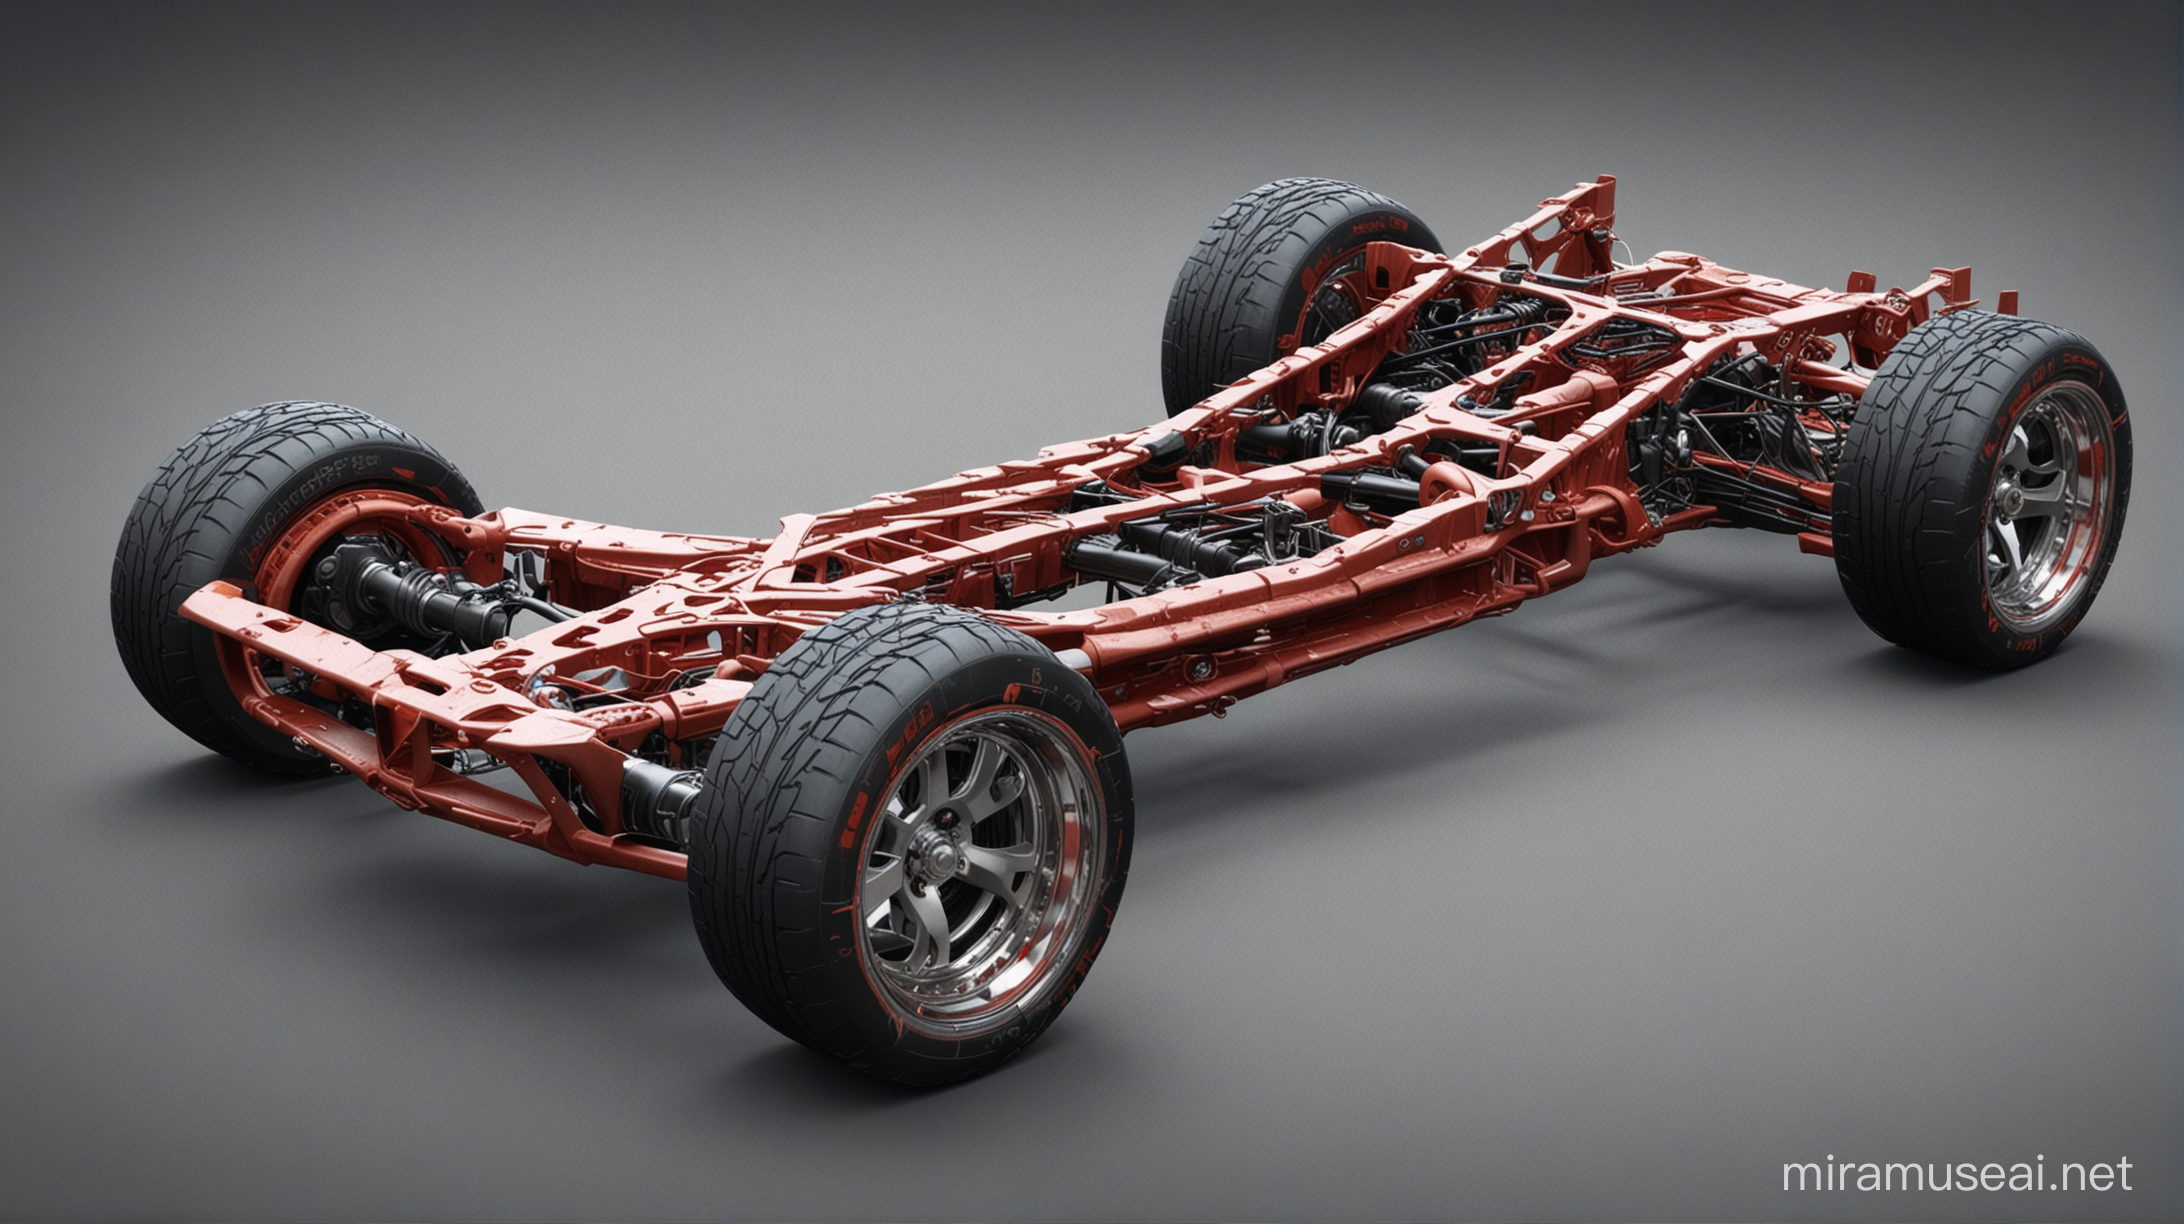 Stylish and Functional Car Chassis Design